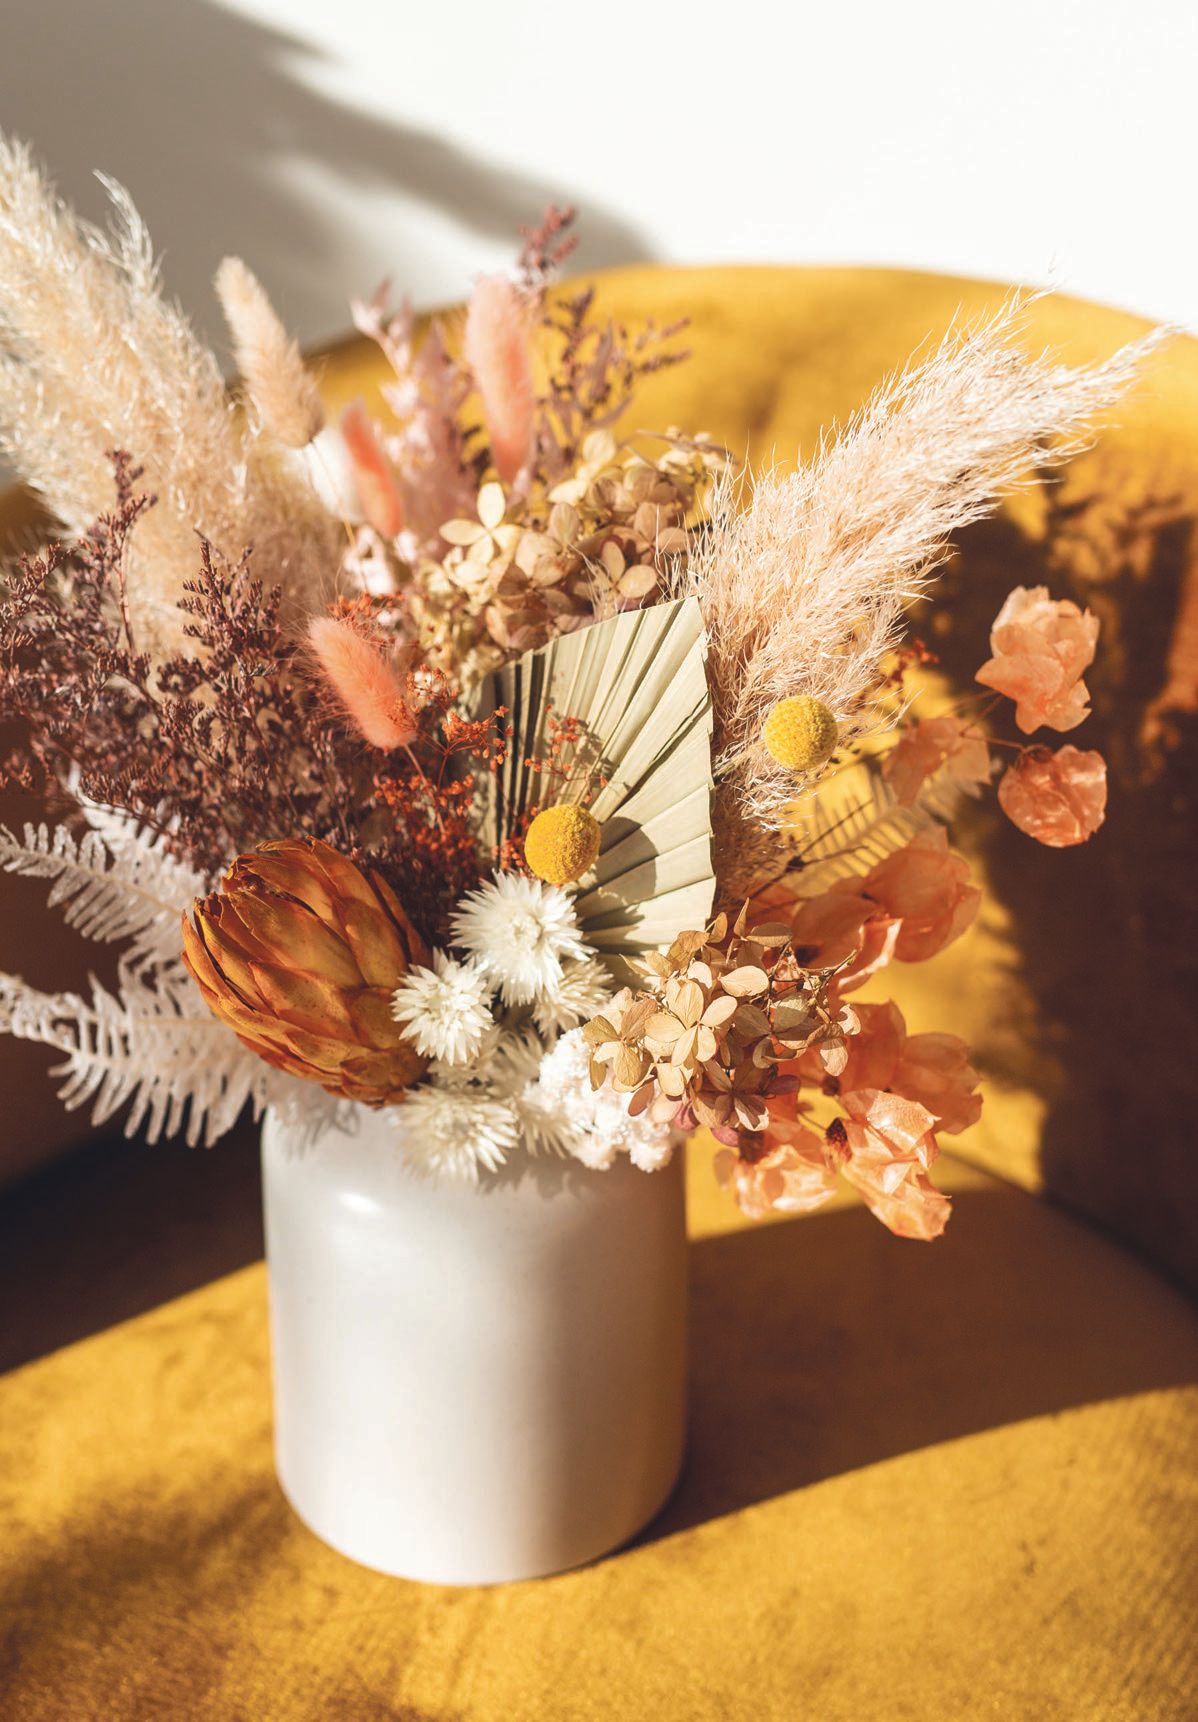 JJ’s Flower Shop offers stunning dried bouquets that can be enjoyed for years to come. PHOTO BY EMILY AND CARLOS VILA OF TWOCAN STUDIO